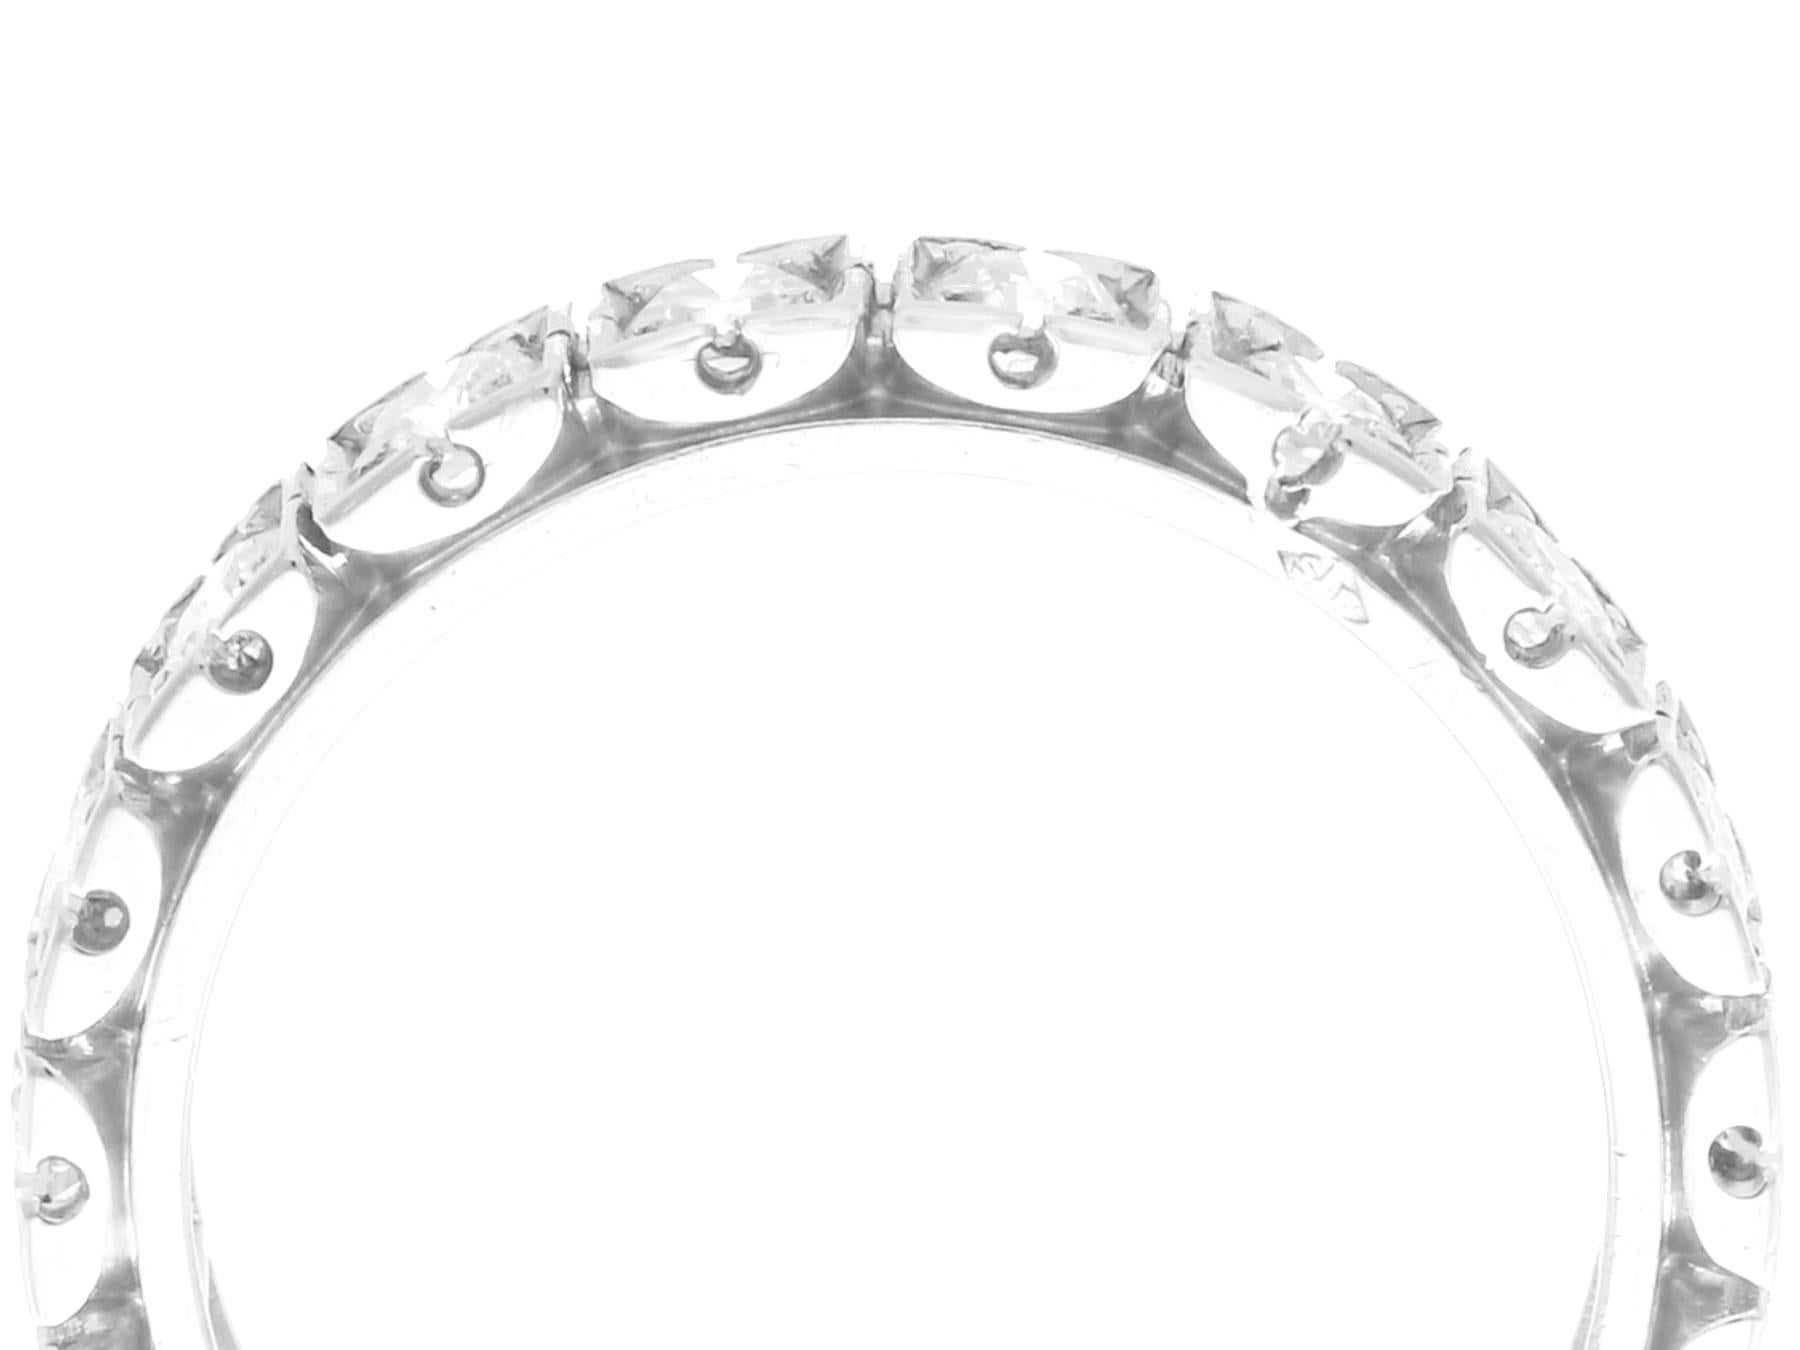 A fine and impressive vintage French 1.62 carat diamond and 18 karat white gold full eternity ring; a part of our diverse collection of vintage jewelry and estate jewelry.

This fine and impressive vintage eternity ring has been crafted in 18k white